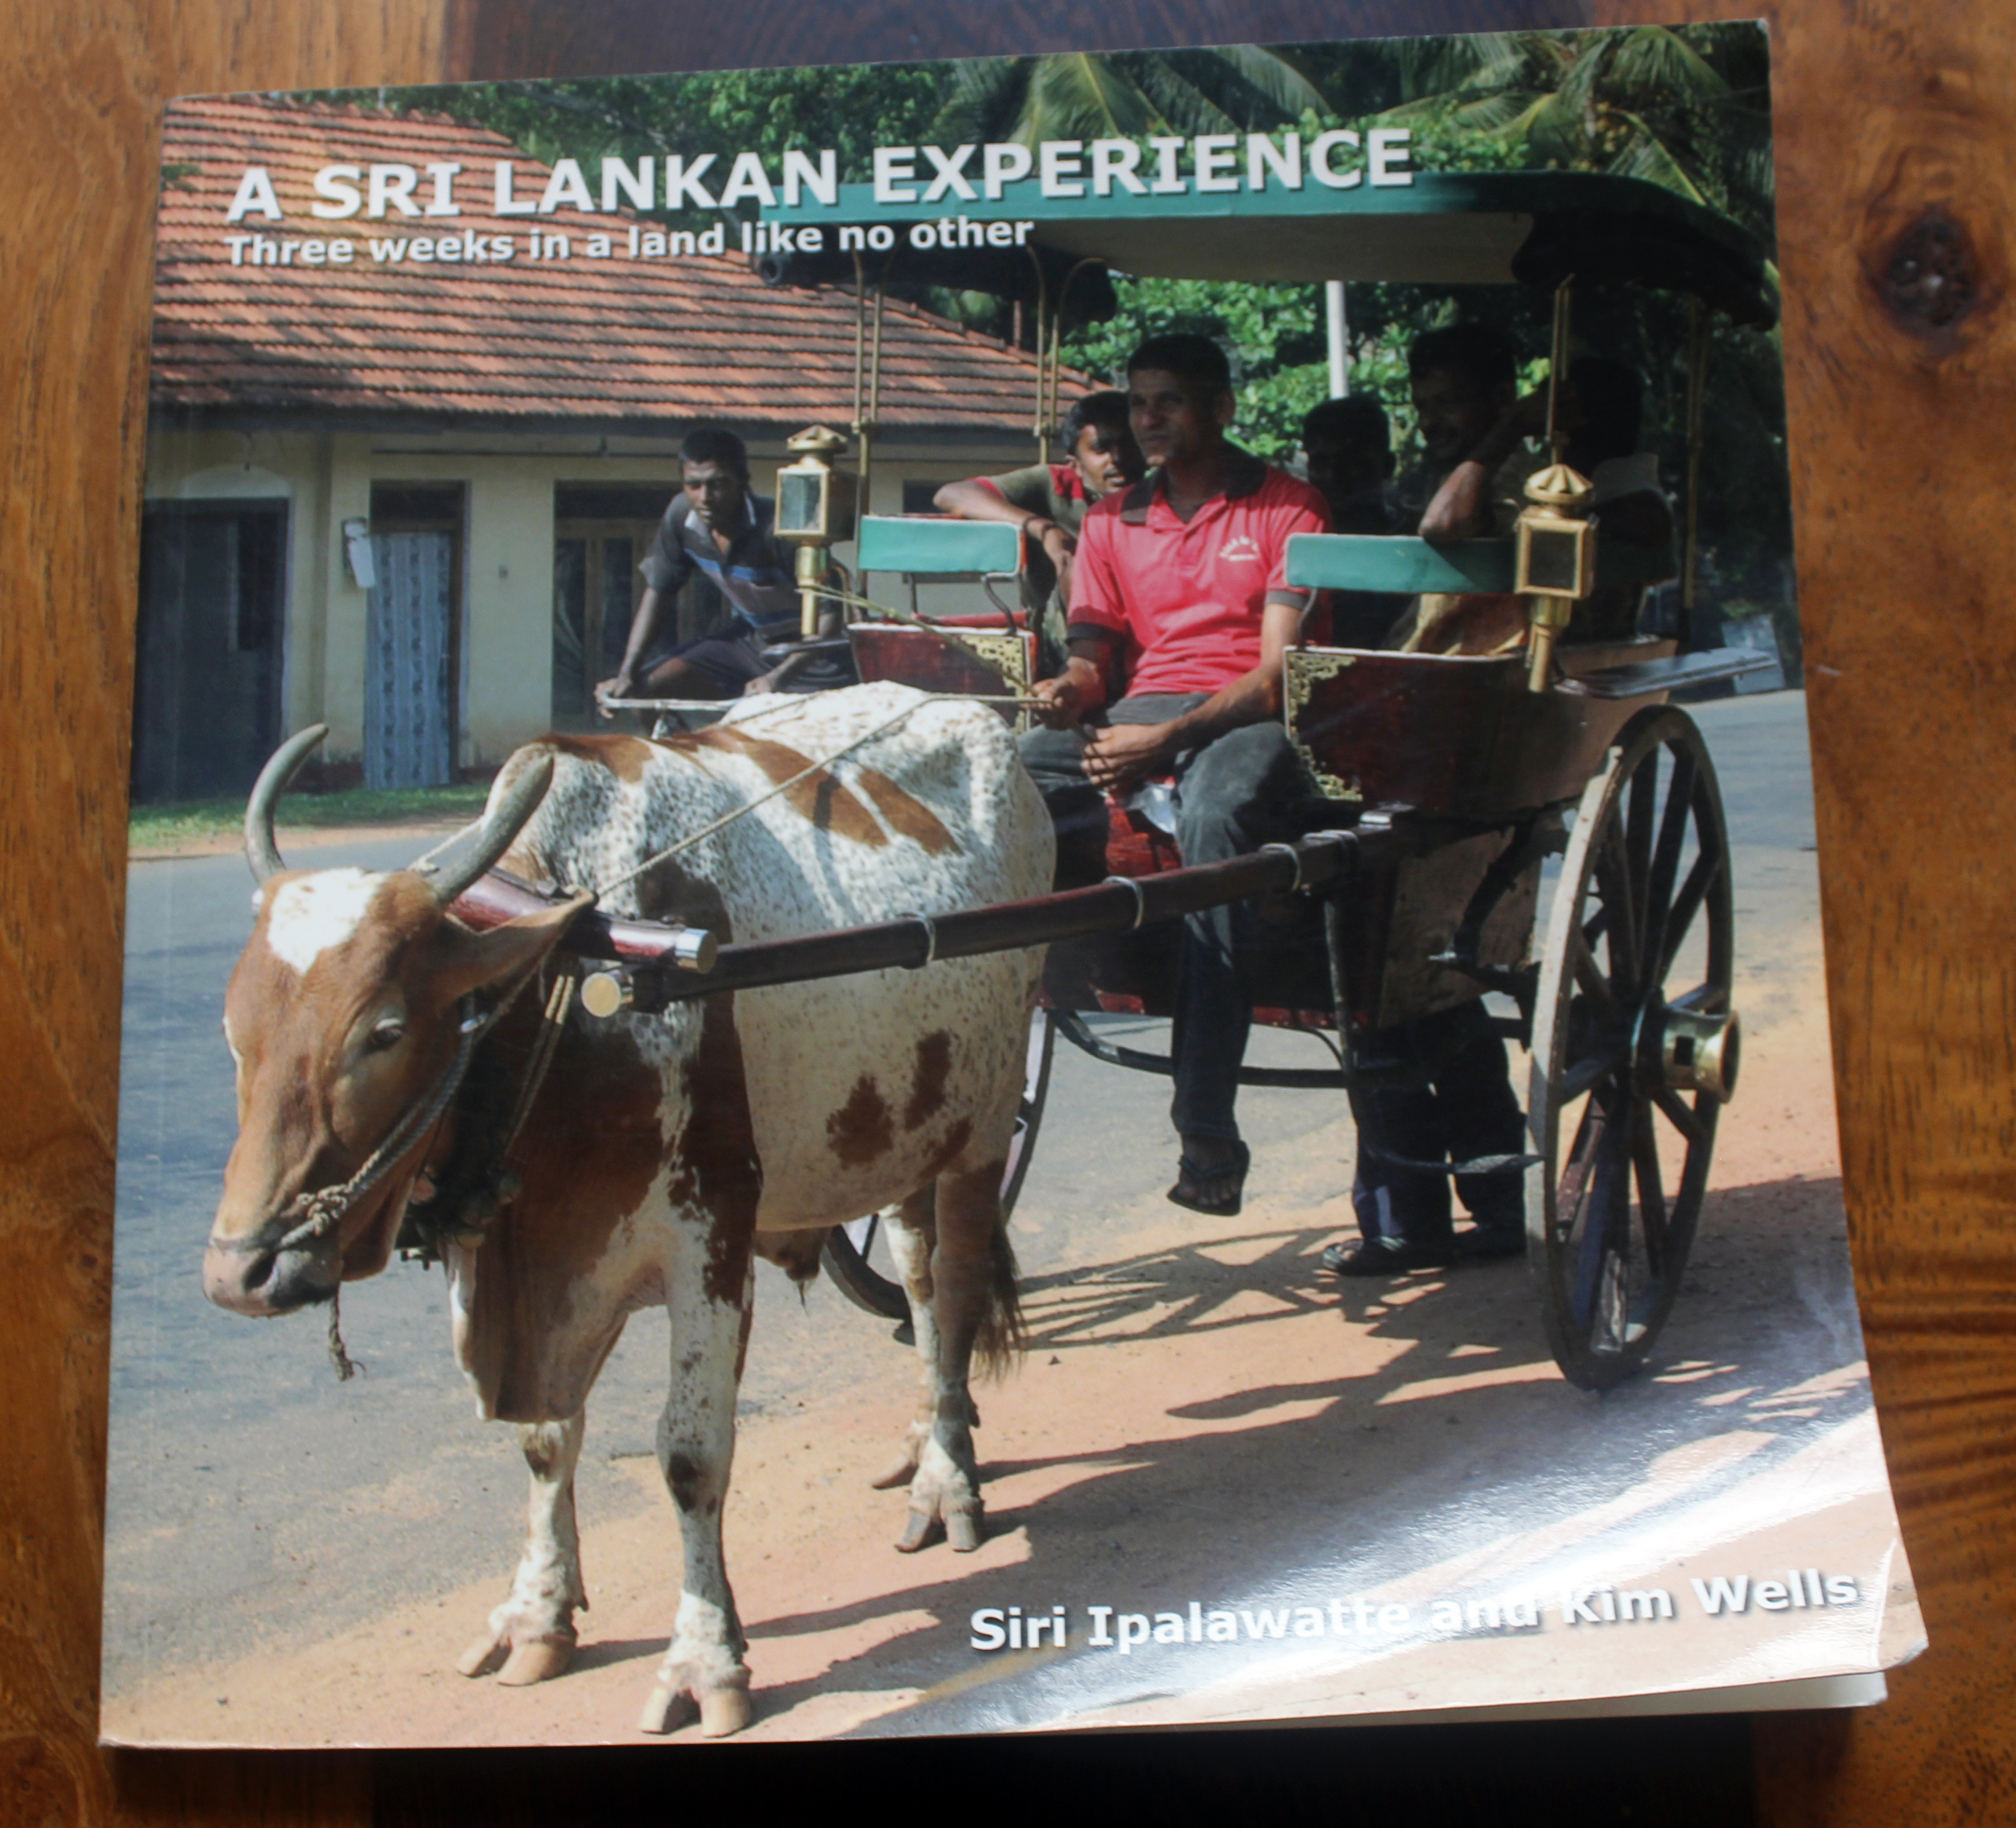 A Sri Lankan Experience Three weeks in a land like on other